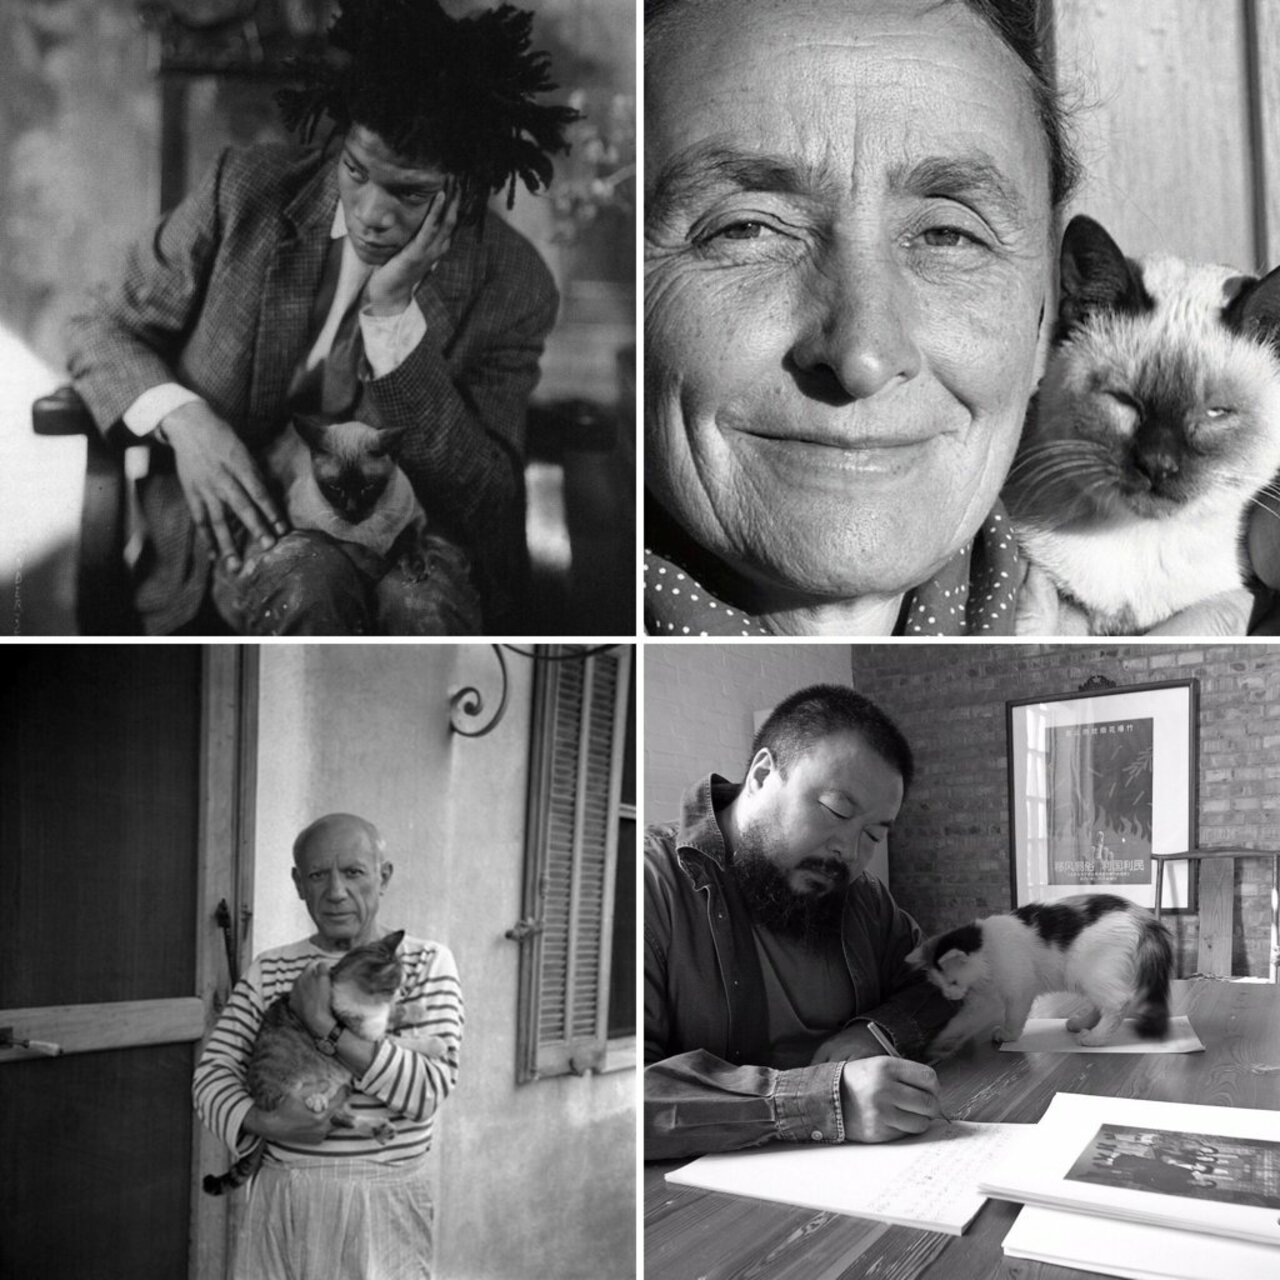 On #InternationalCatDay: artists Jean-Michel Basquiat, Georgia O'Keeffe, Picasso, Ai Weiwei with their feline muses. https://t.co/bvXyib388U